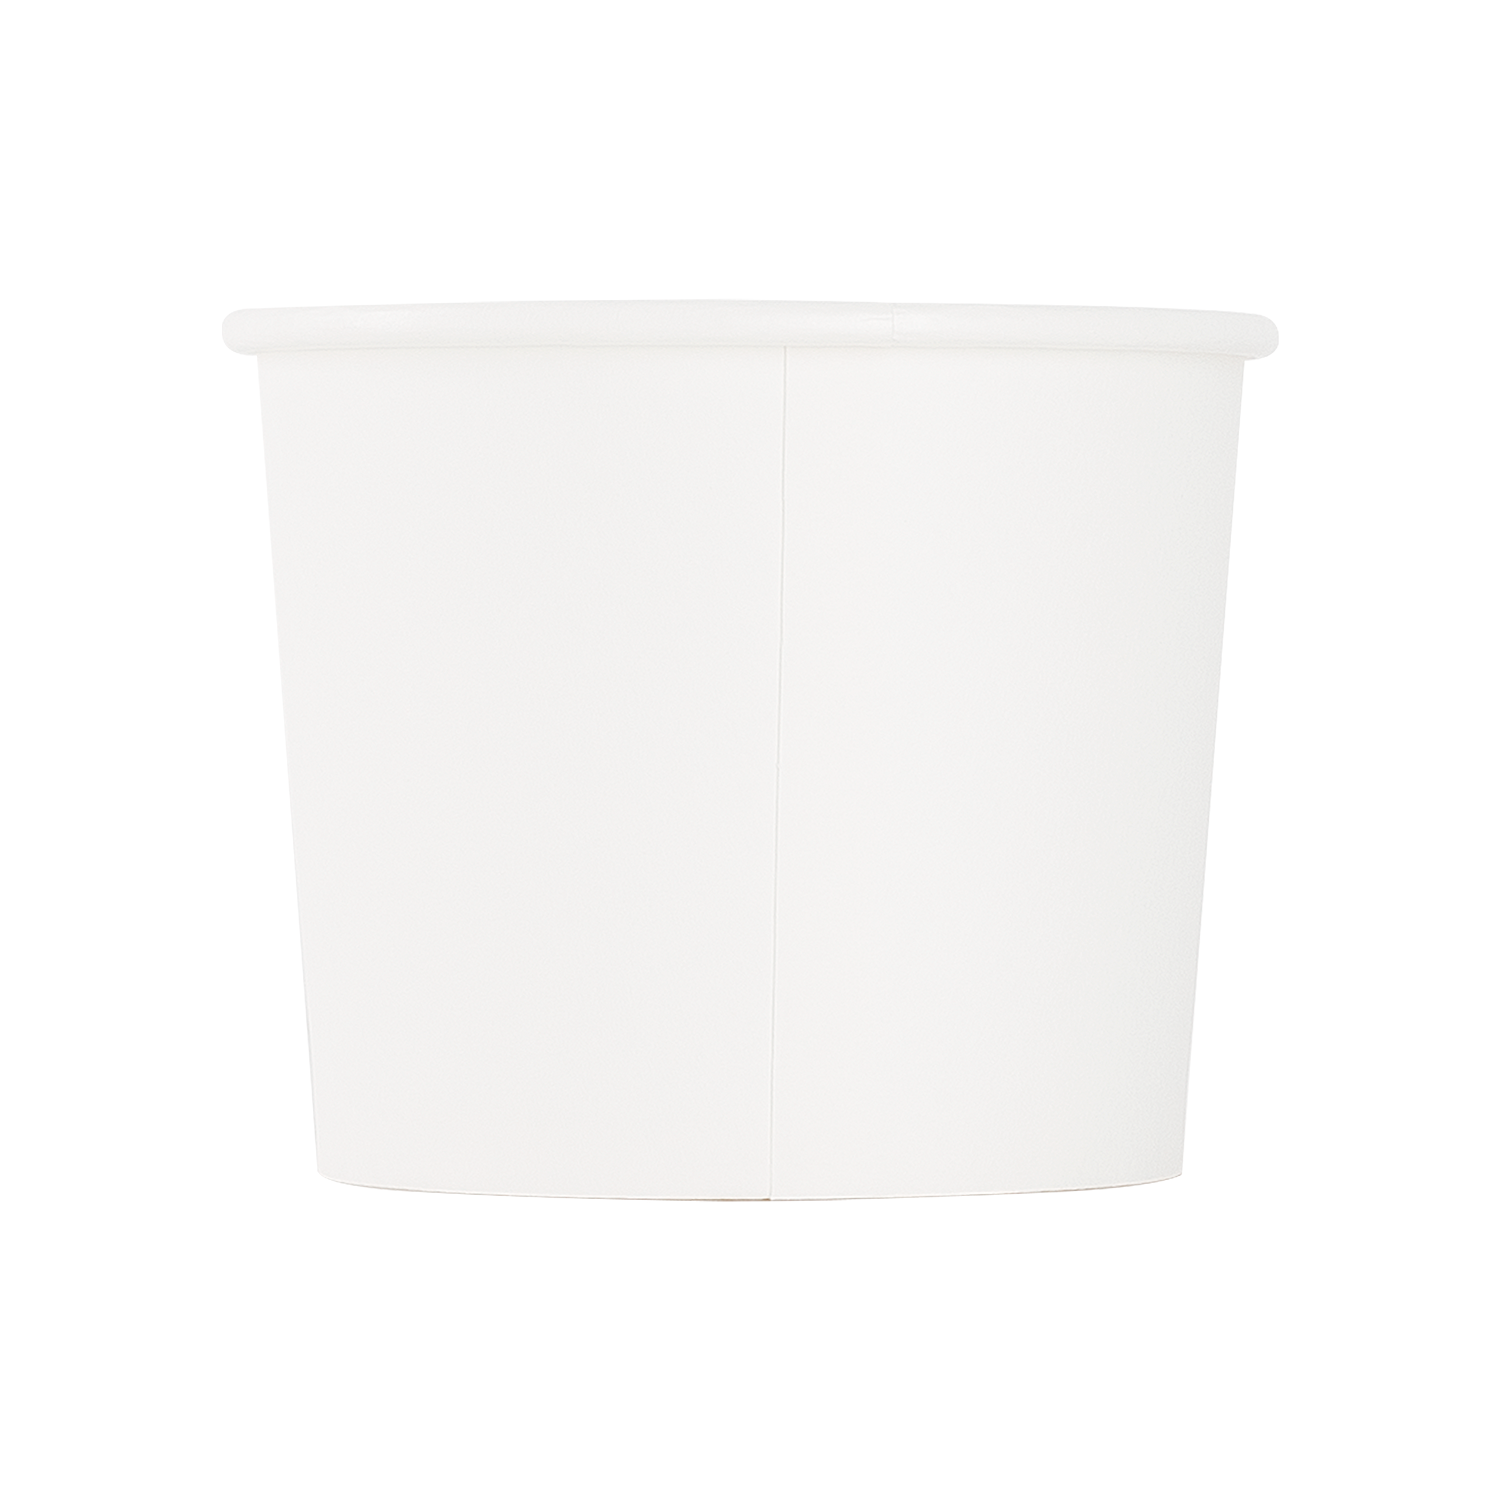 Karat Earth Eco-Friendly 10oz Paper Cold/ Hot Food Container (90.8mm), White - 1,000 pcs